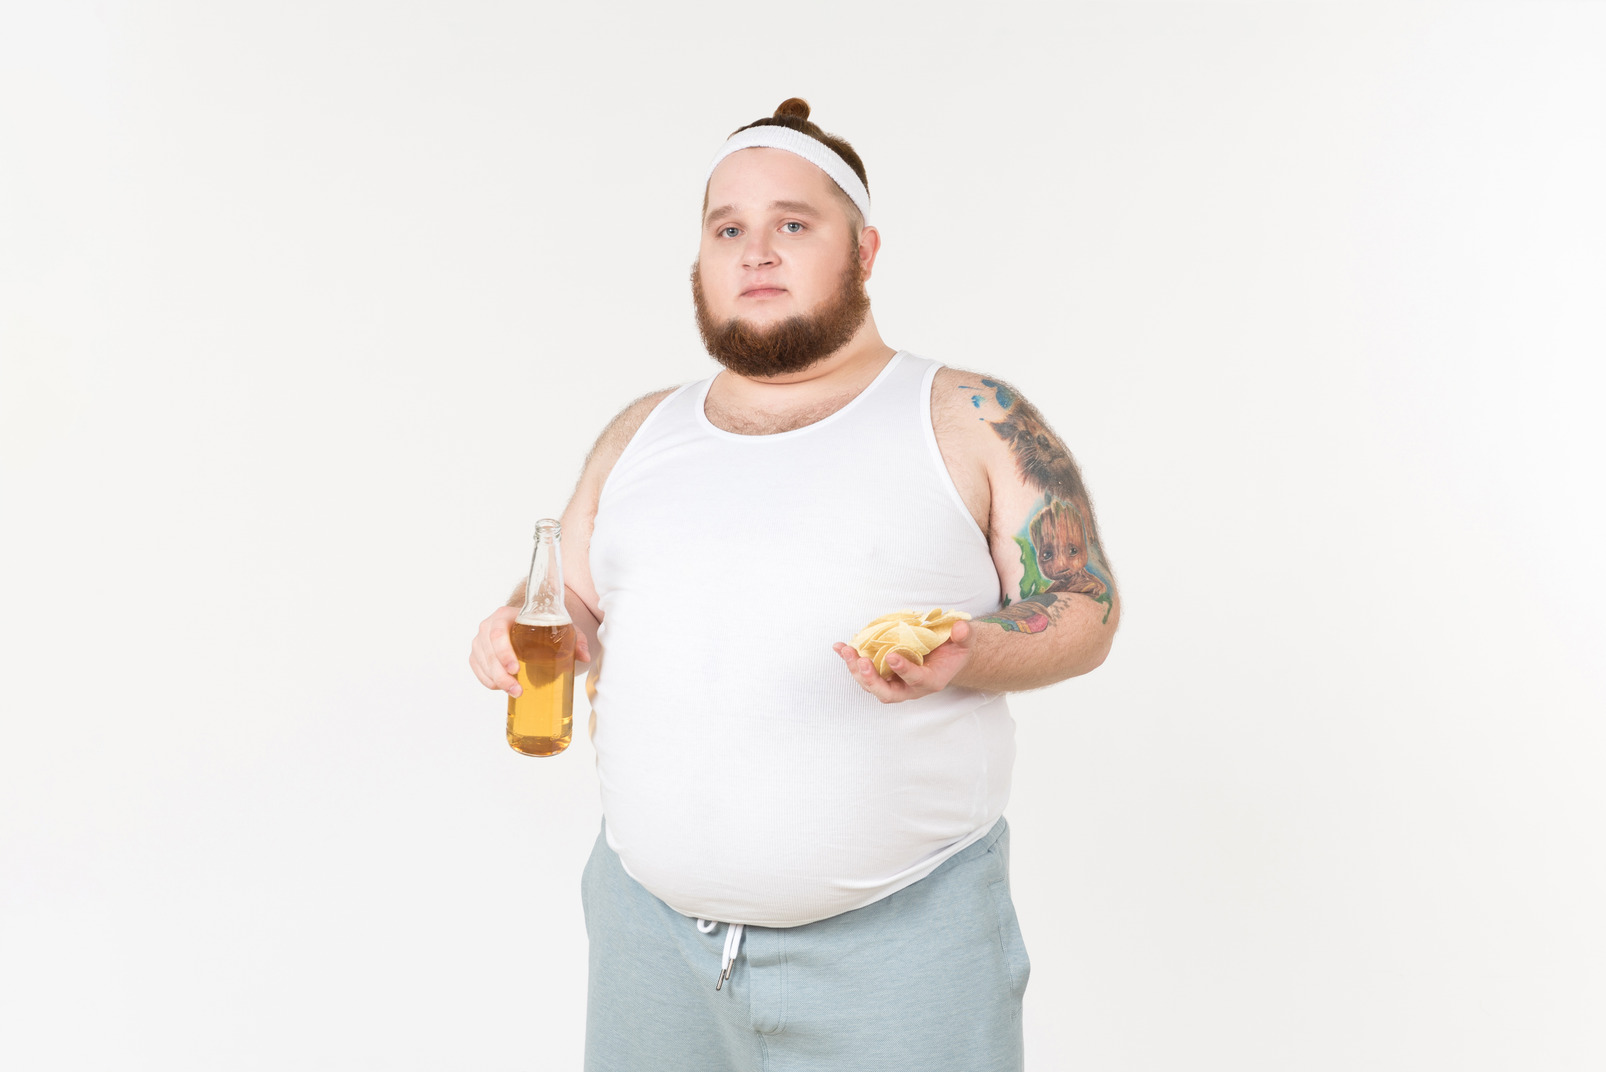 A fat man in sportswear holding a bottle of beer and potato chips